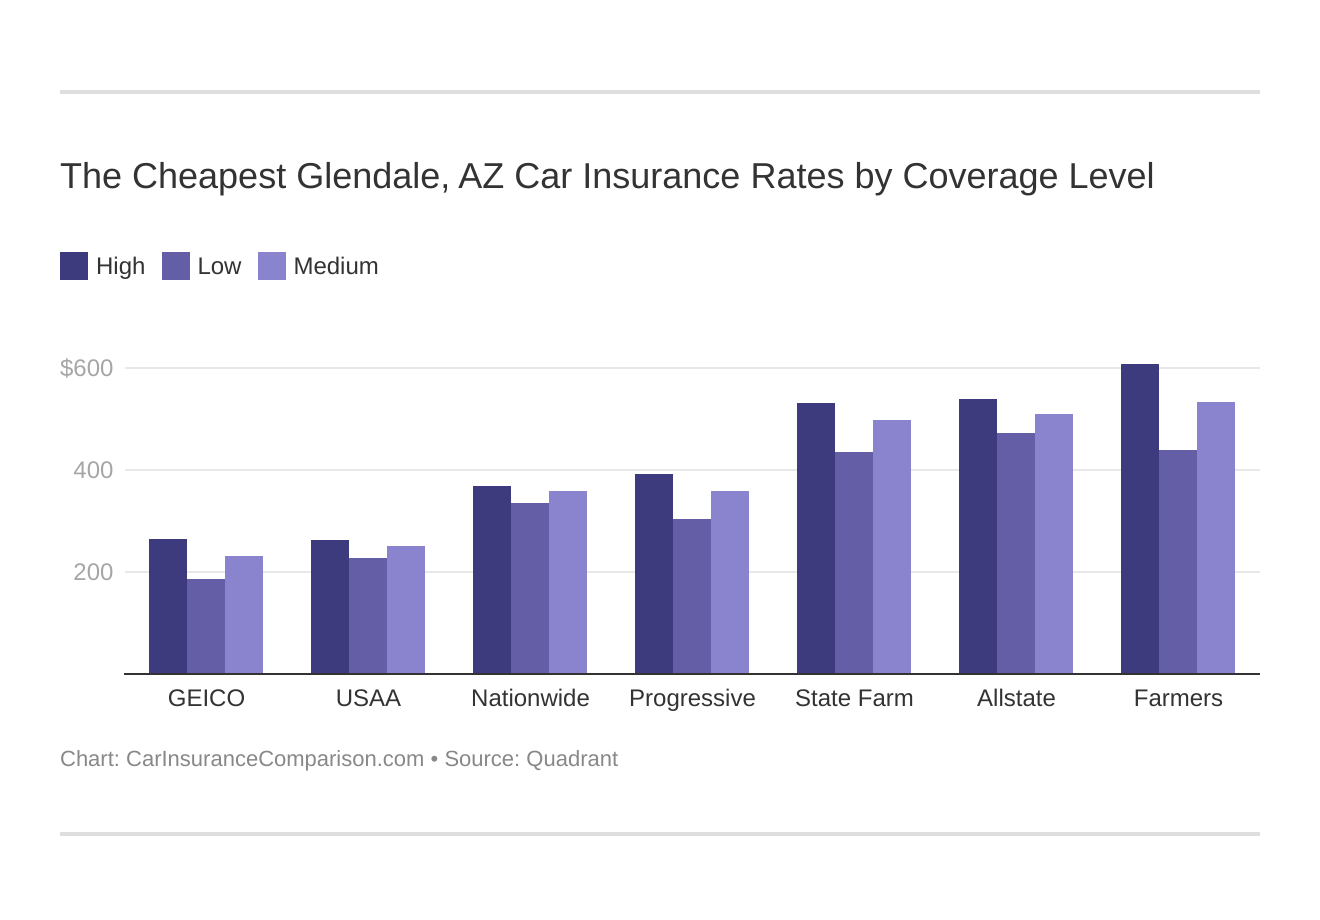 The Cheapest Glendale, AZ Car Insurance Rates by Coverage Level